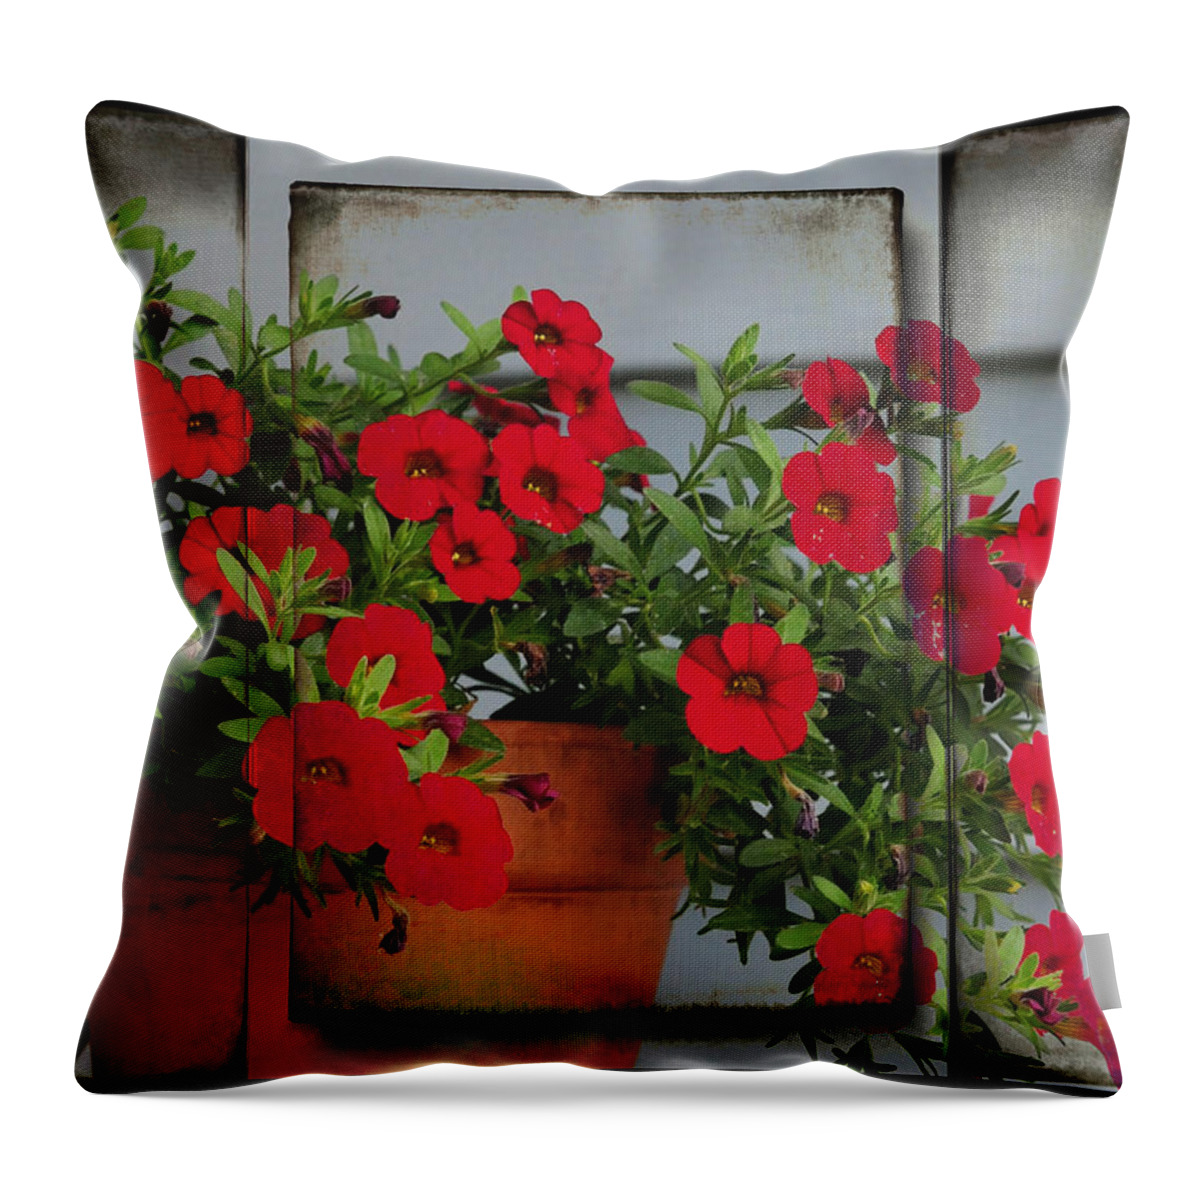 Petunias Throw Pillow featuring the photograph Delores Flowers by Peggy Dietz